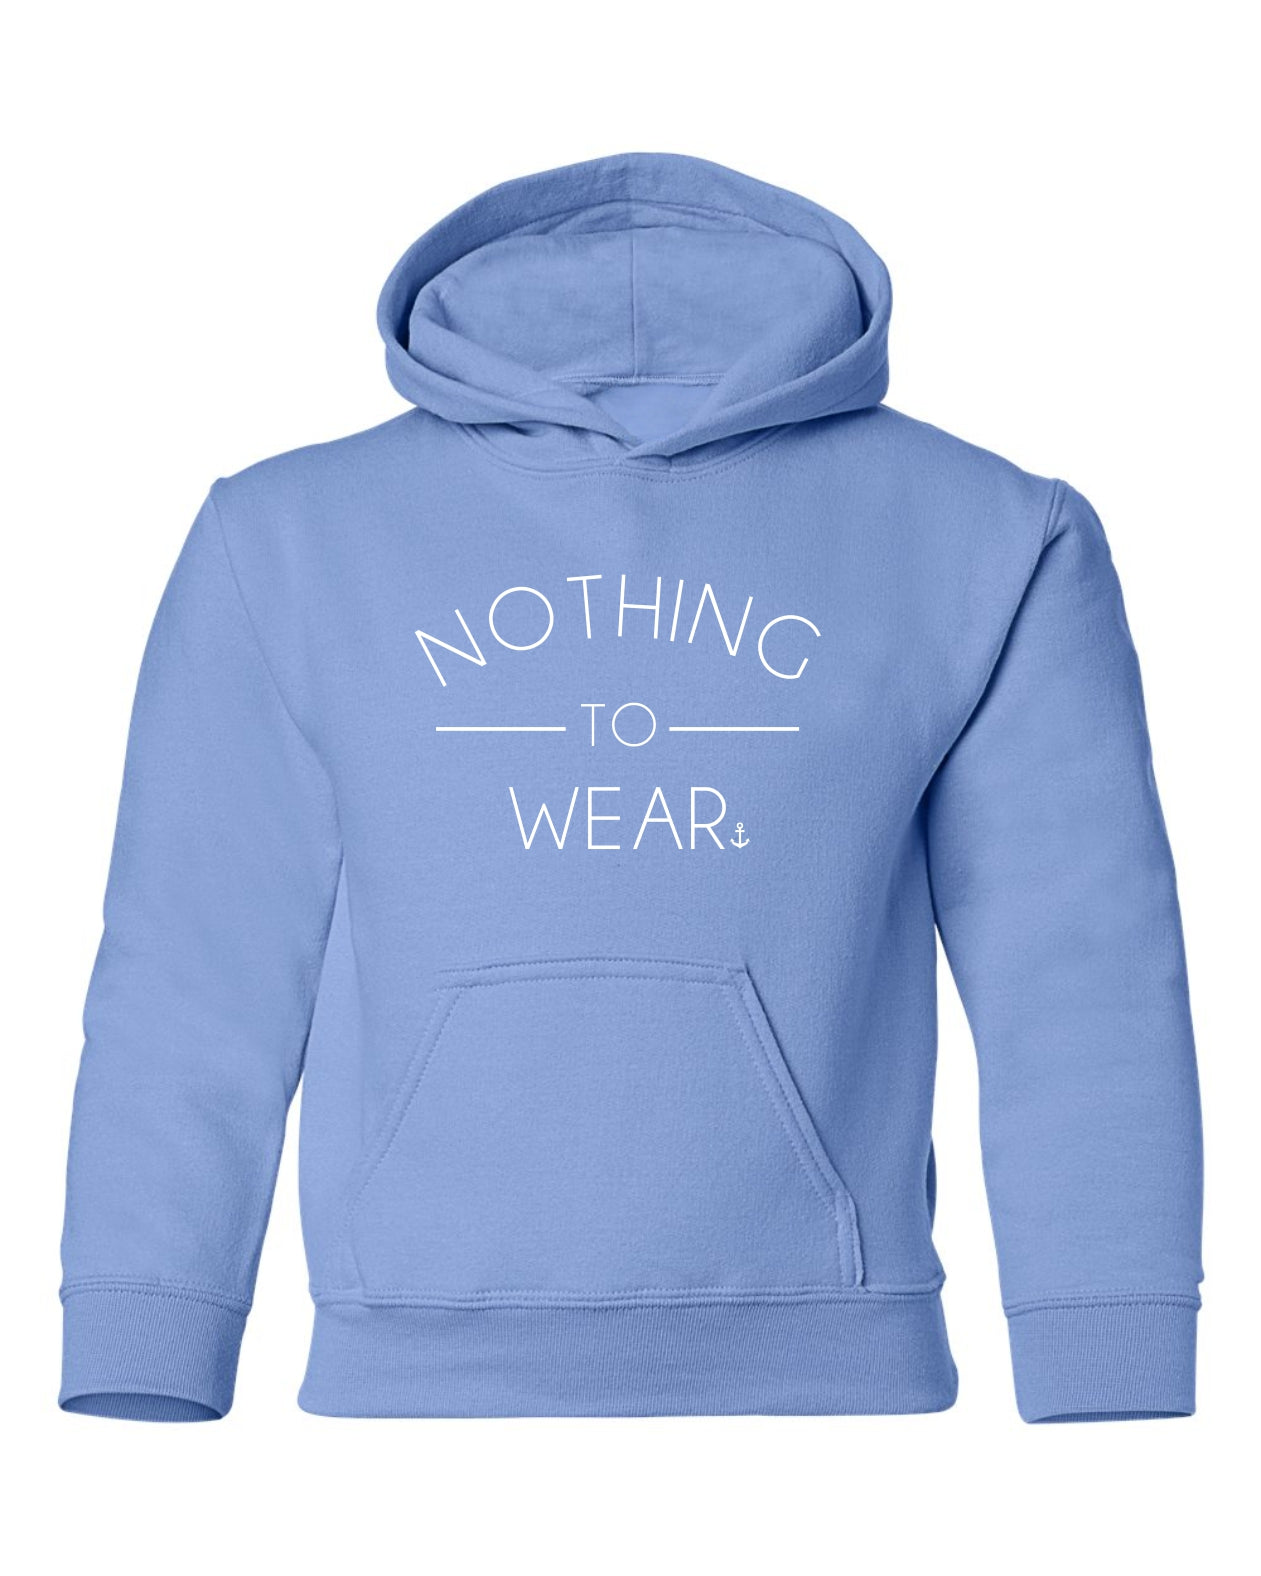 "Nothing To Wear" Youth Hoodie